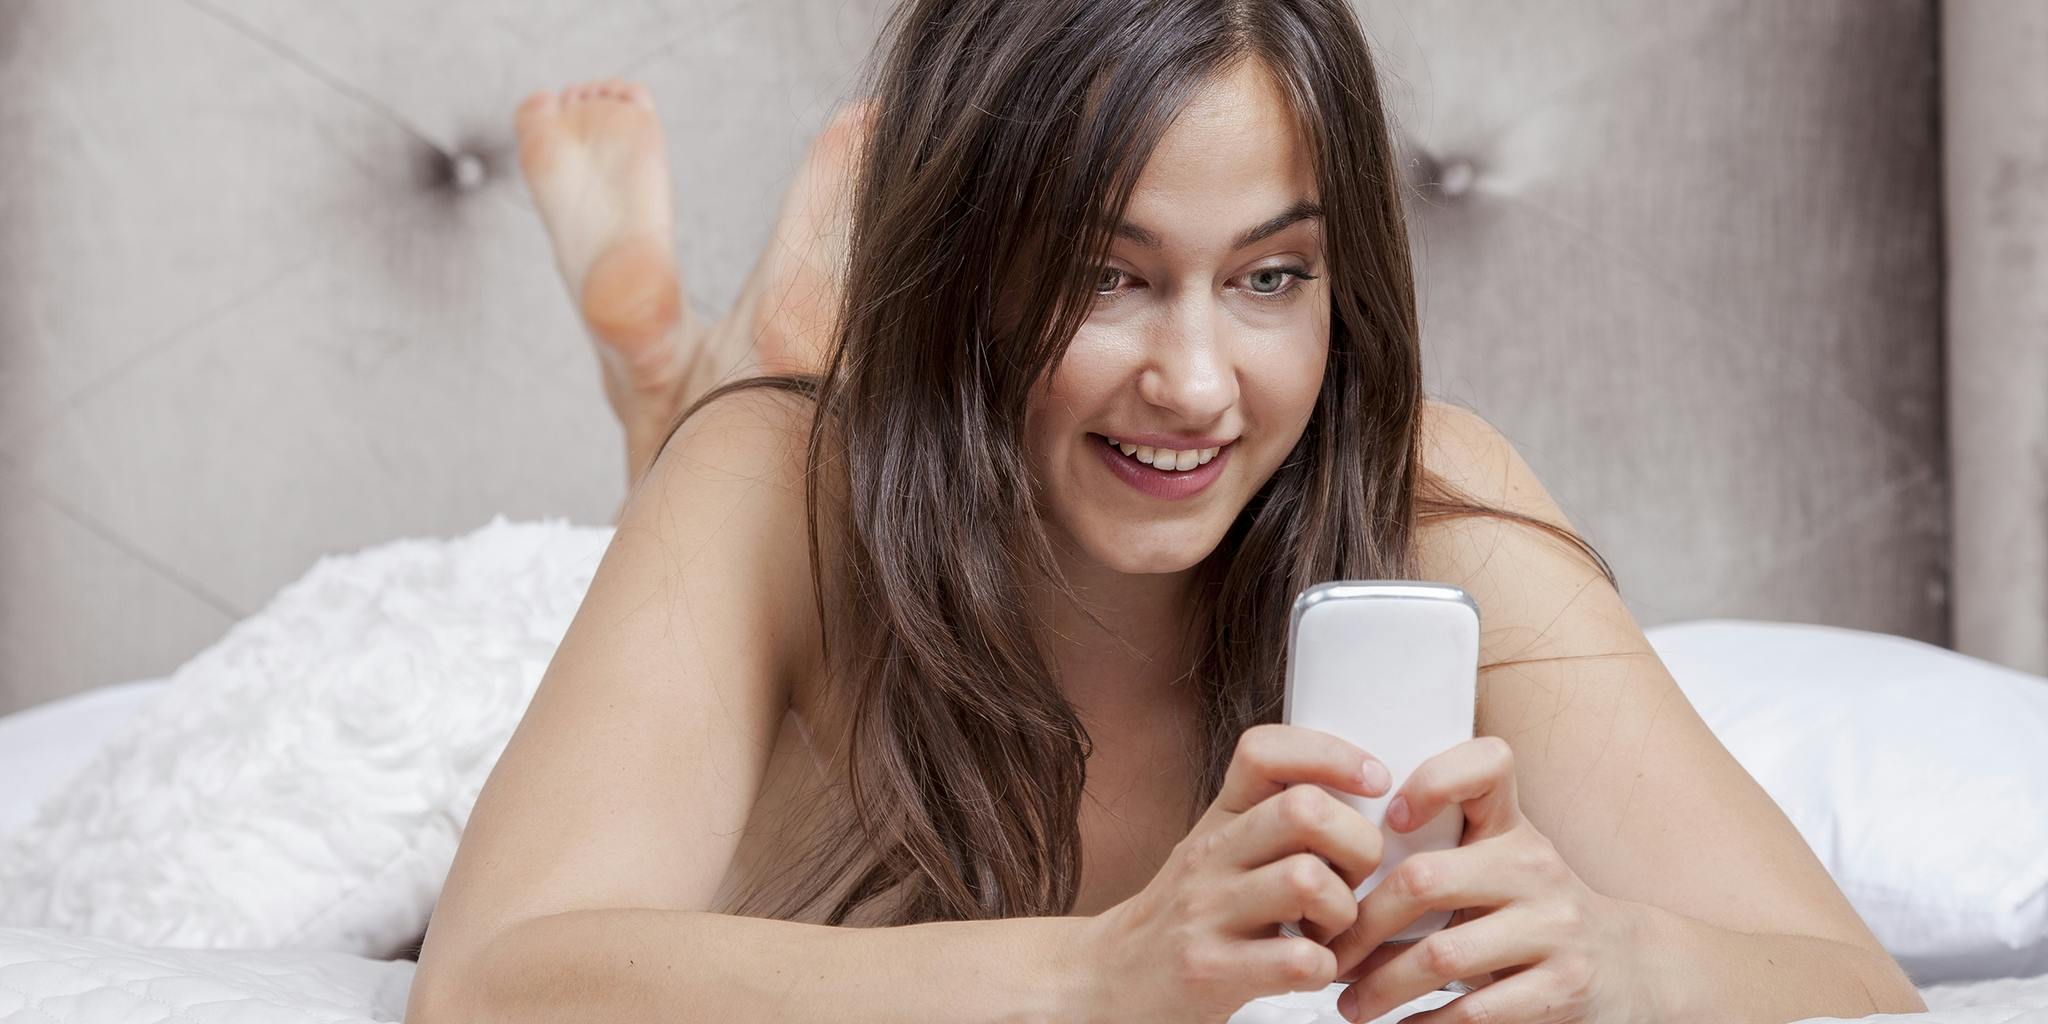 Mobile Pornes - How to Watch Porn on Your Smartphone Without Catching a Virus